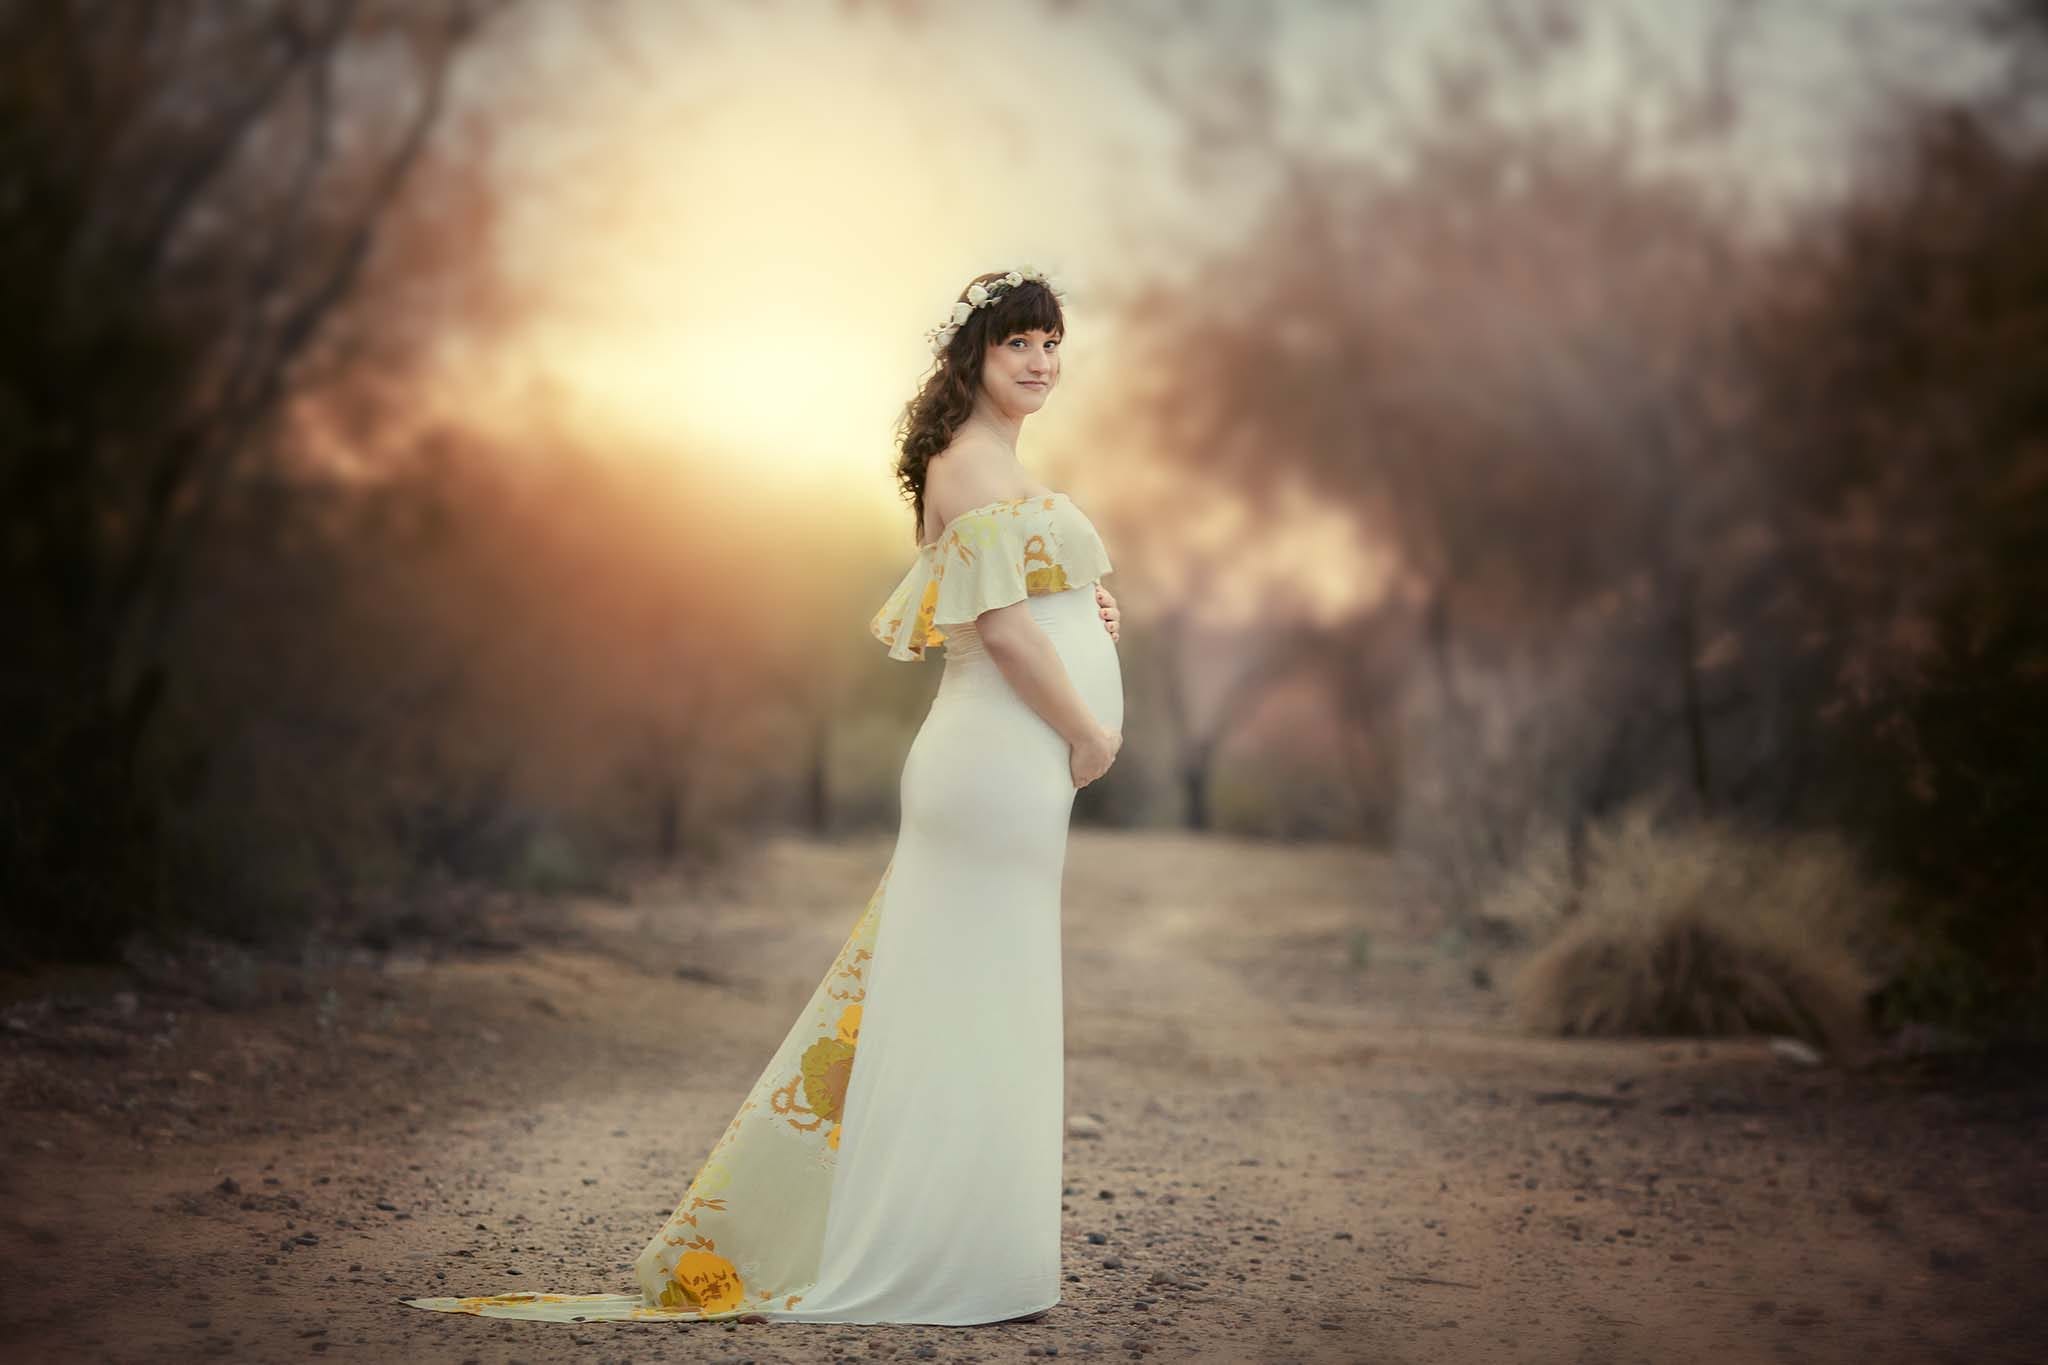 The beat maternity photography in Phoenix captures gorgeous mom to be